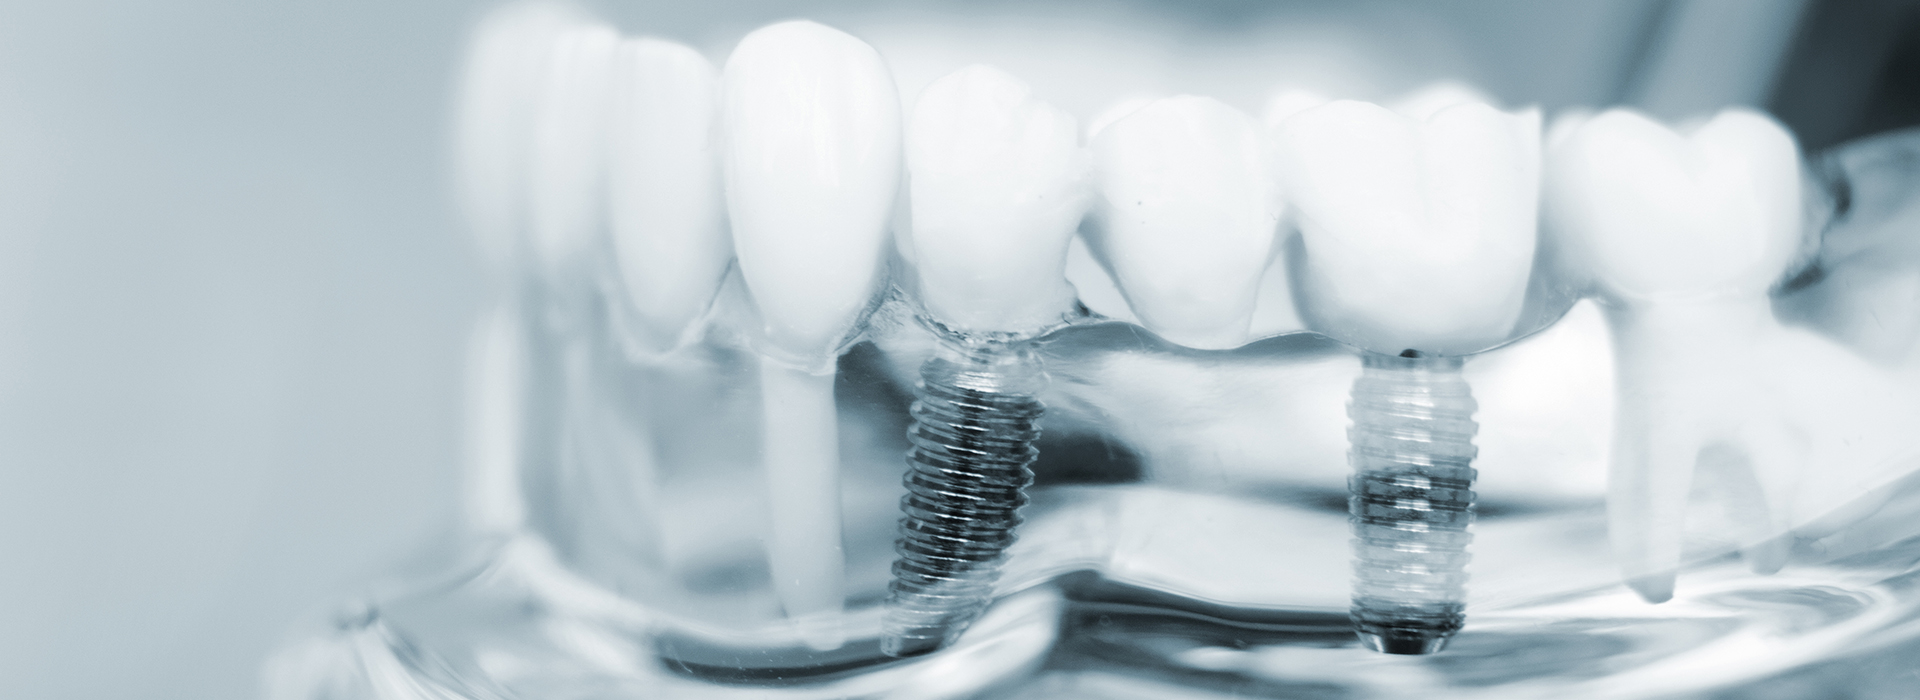 The image shows a close-up of a dental implant with multiple screws and a clear plastic cover, highlighting the components used in dental prosthetics.